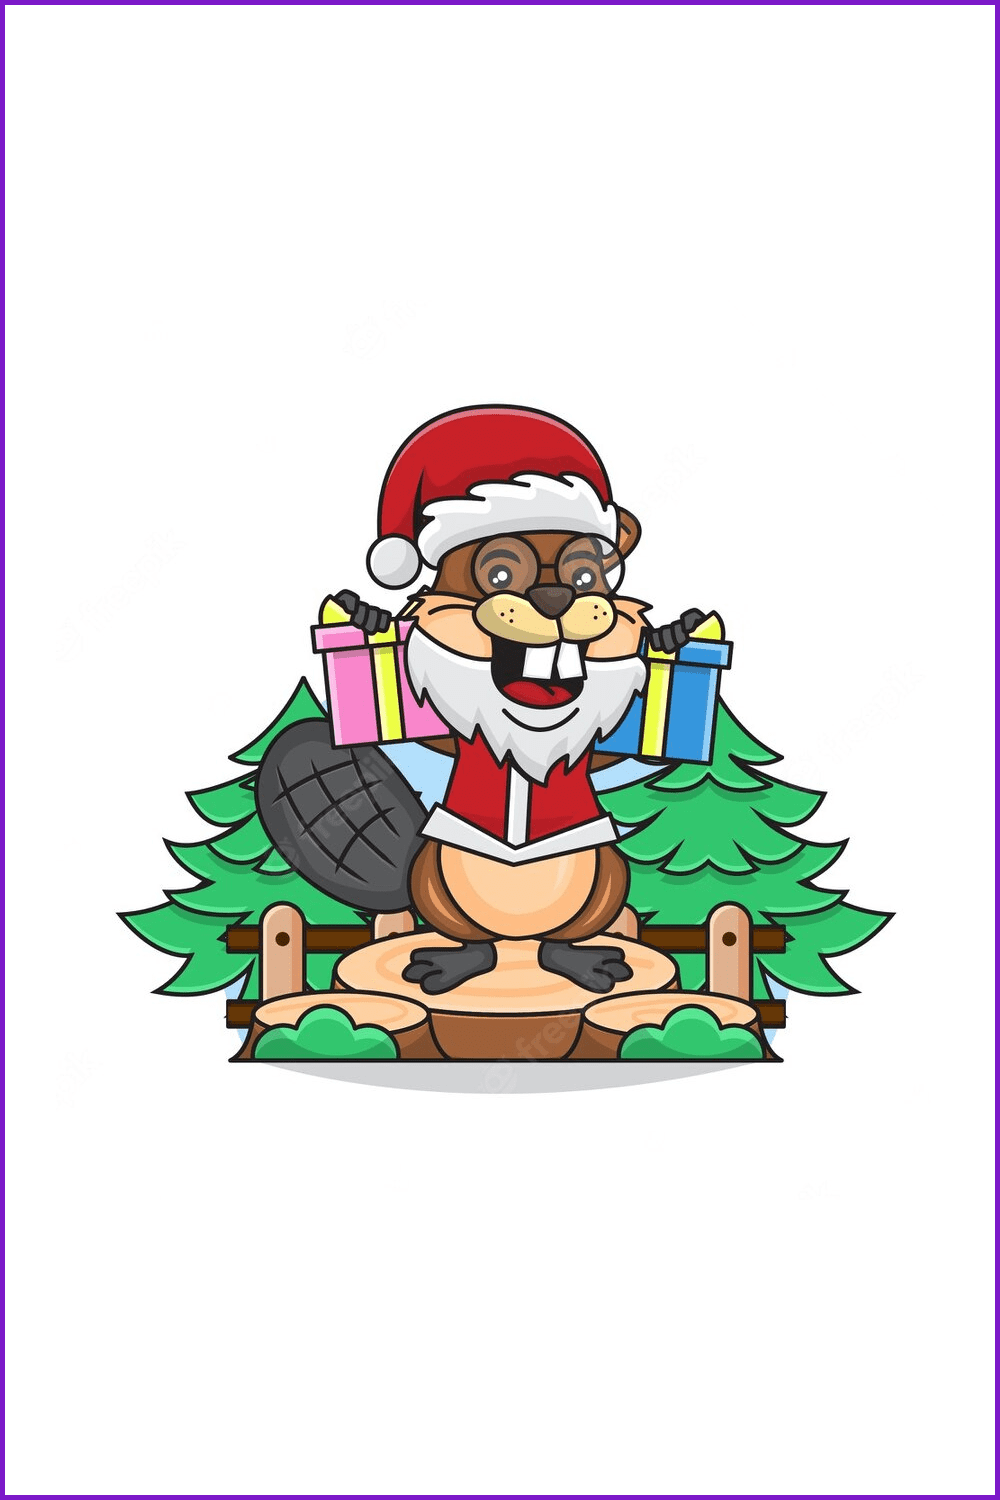 The beaver wears a Santa costume and holds presents.